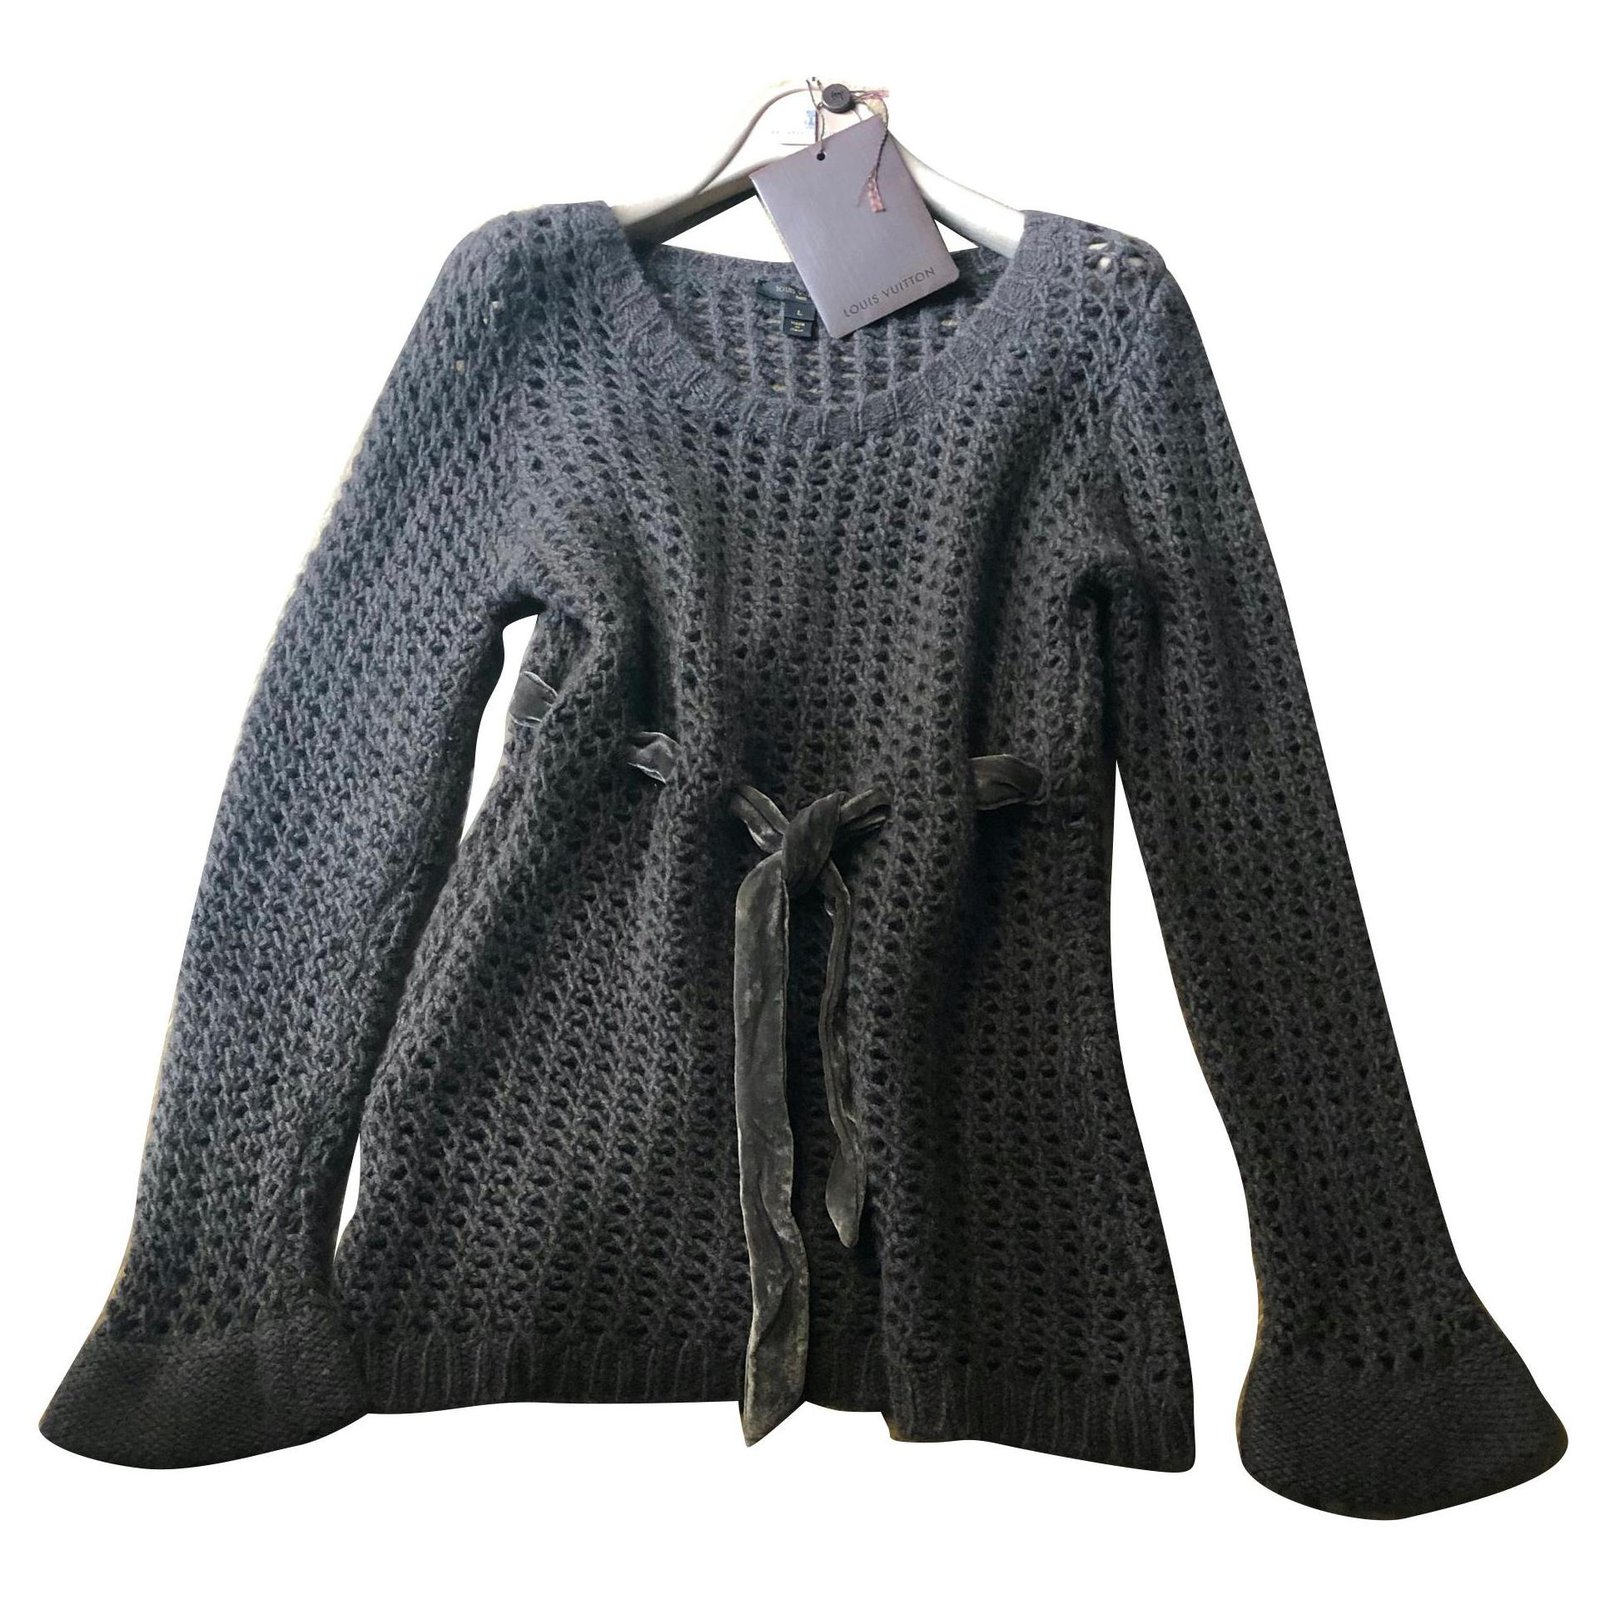 Louis Vuitton Knitted Cardigan Sweater